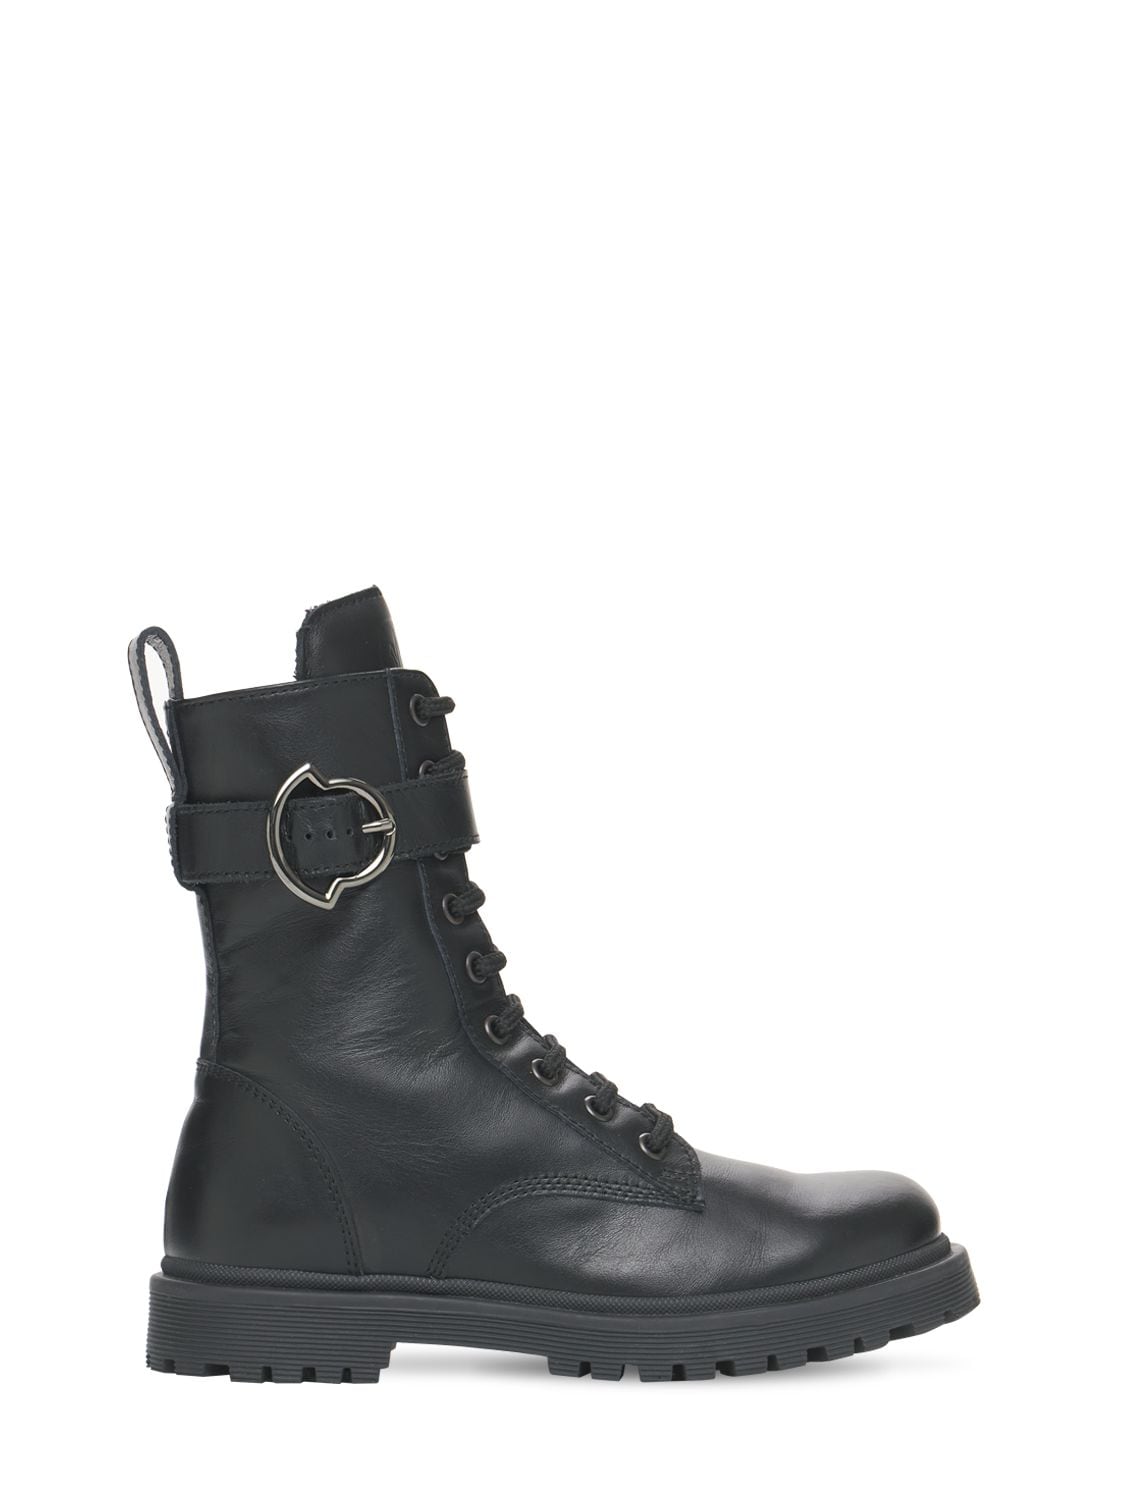 MONCLER PETITE CARINNE LEATHER ANKLE BOOTS,74IFGT143-OTK50